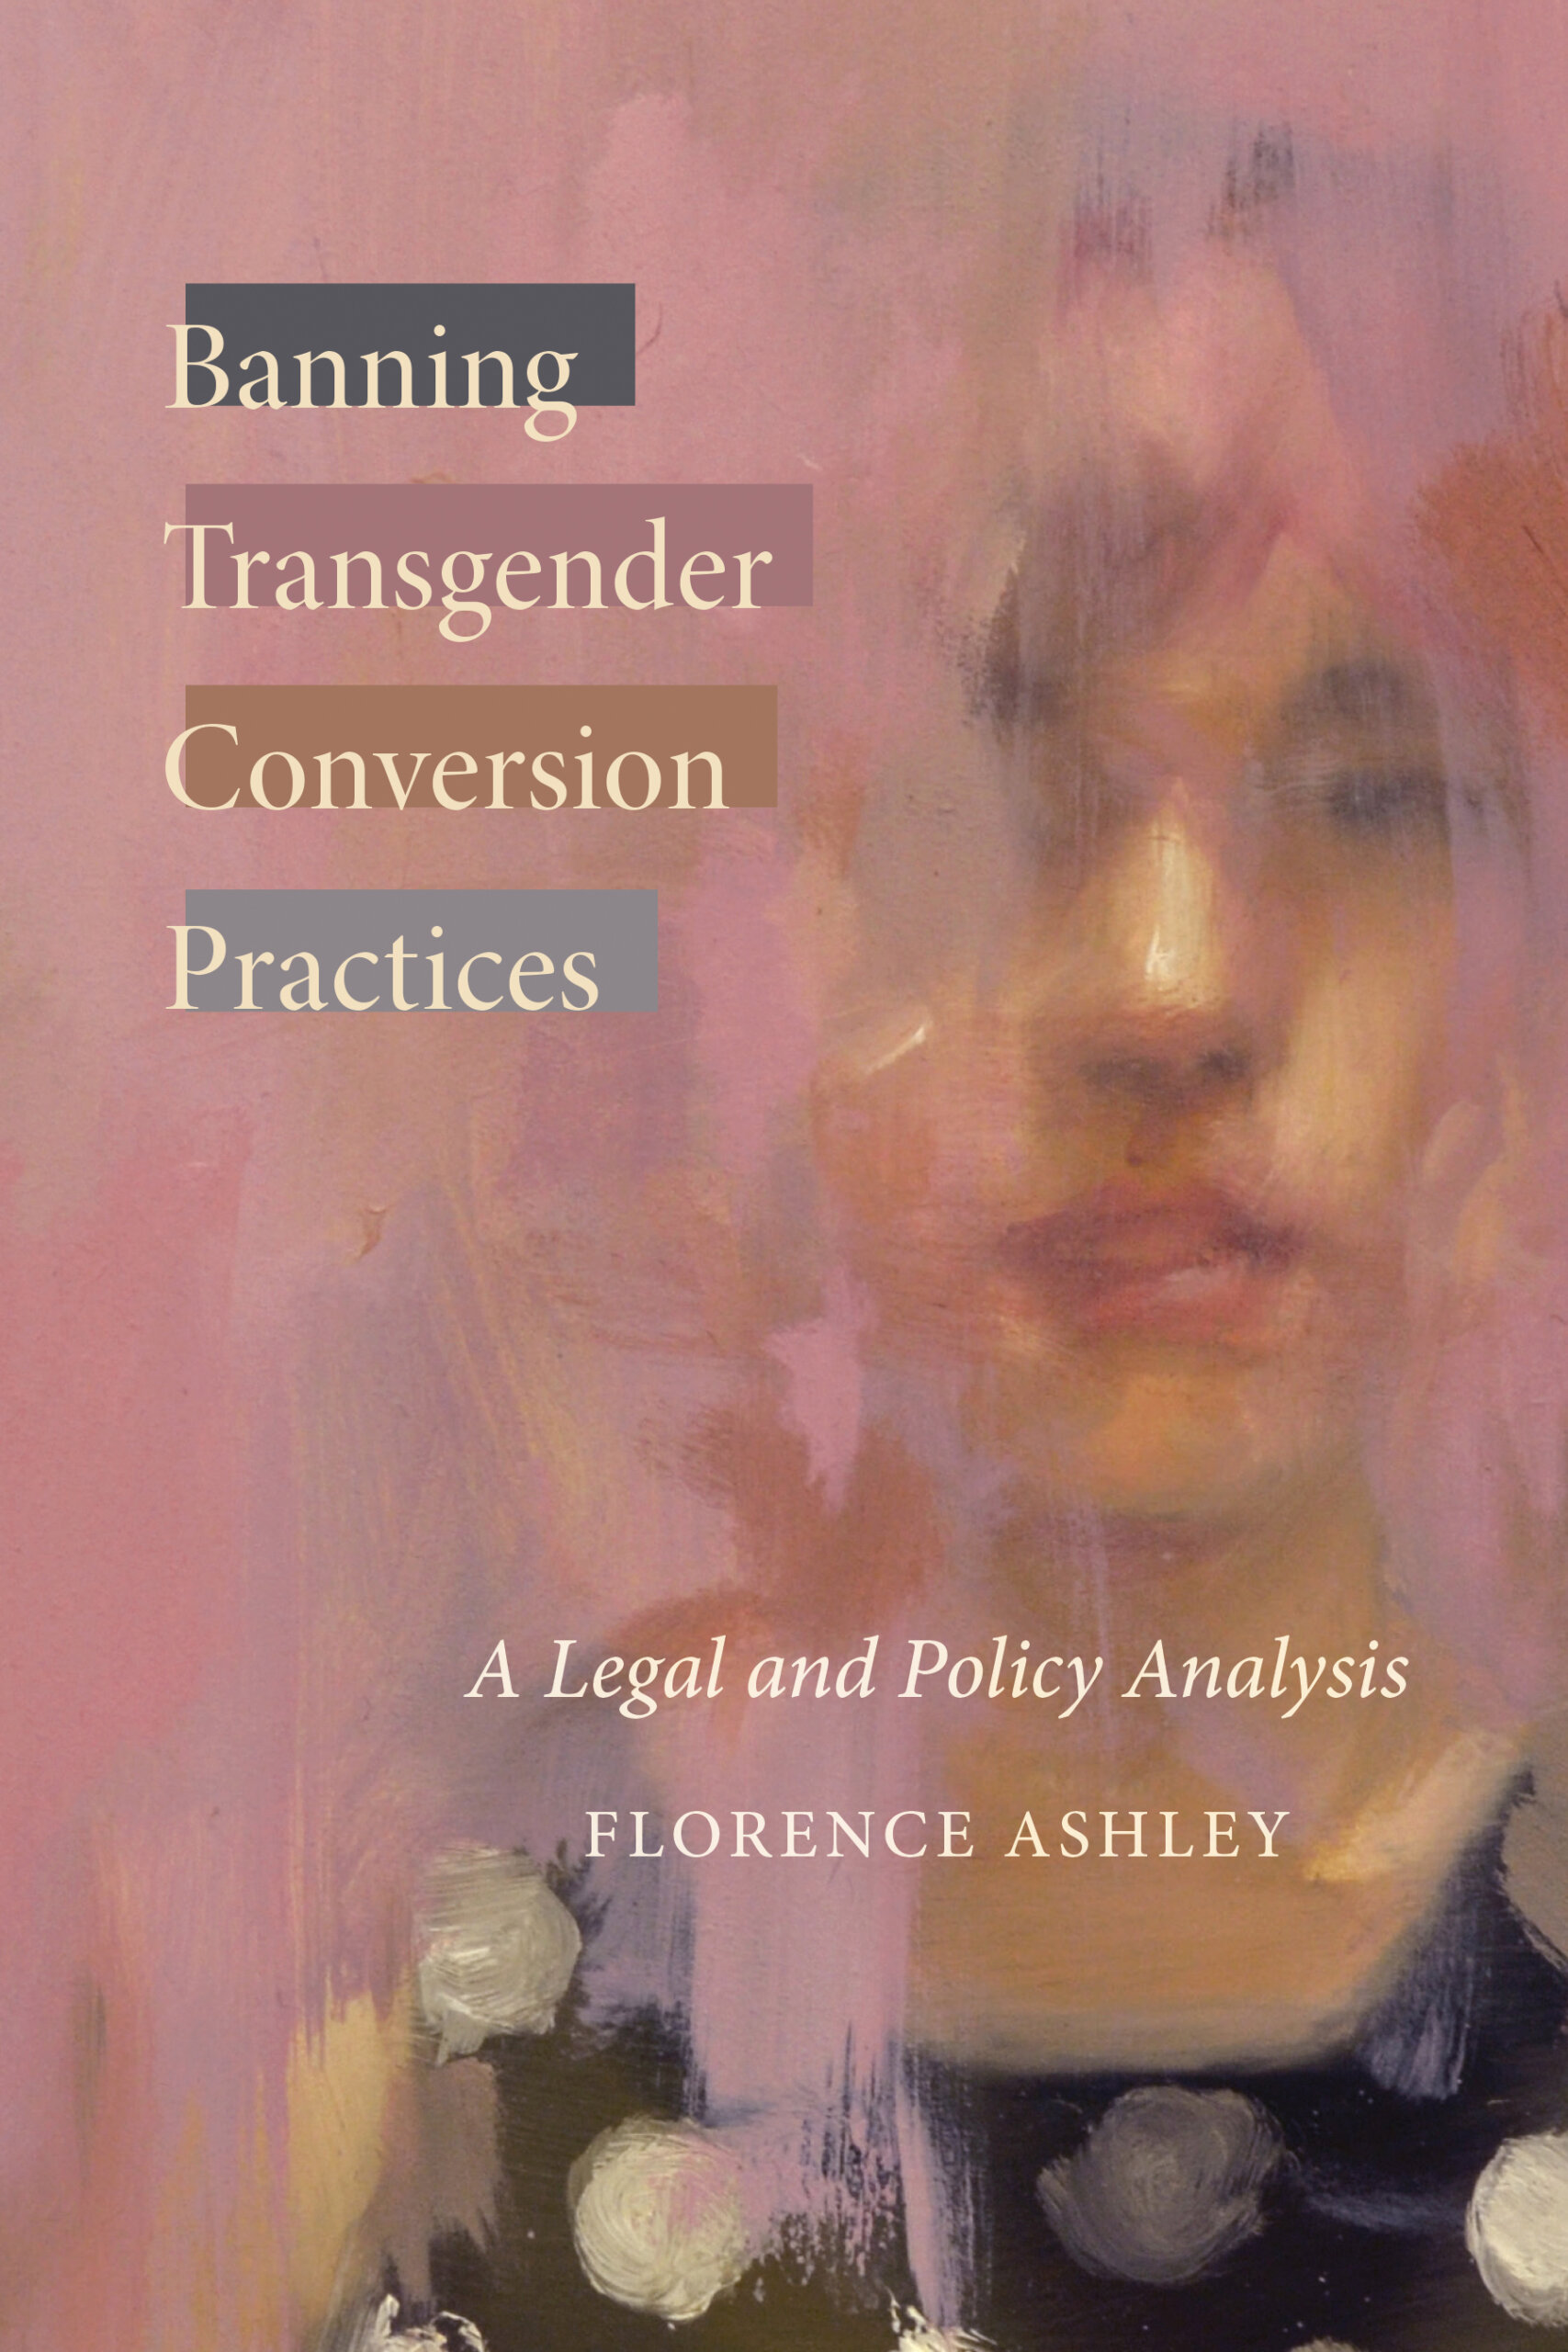 Banning Transgender Conversion Practices book cover by Florence Ashley